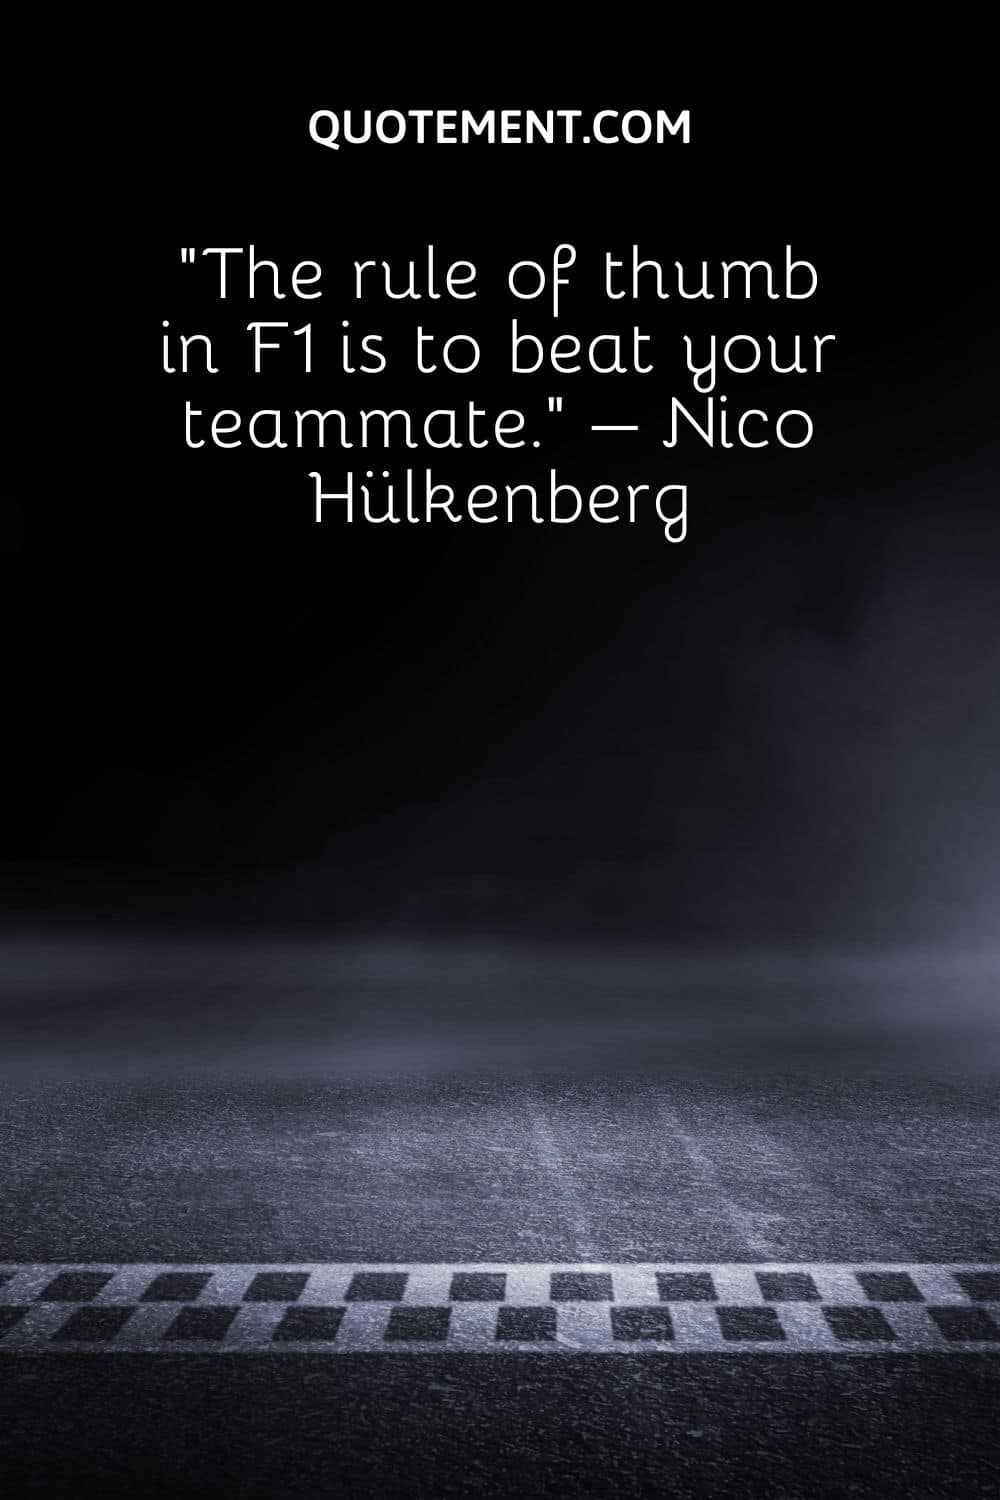 The rule of thumb in F1 is to beat your teammate